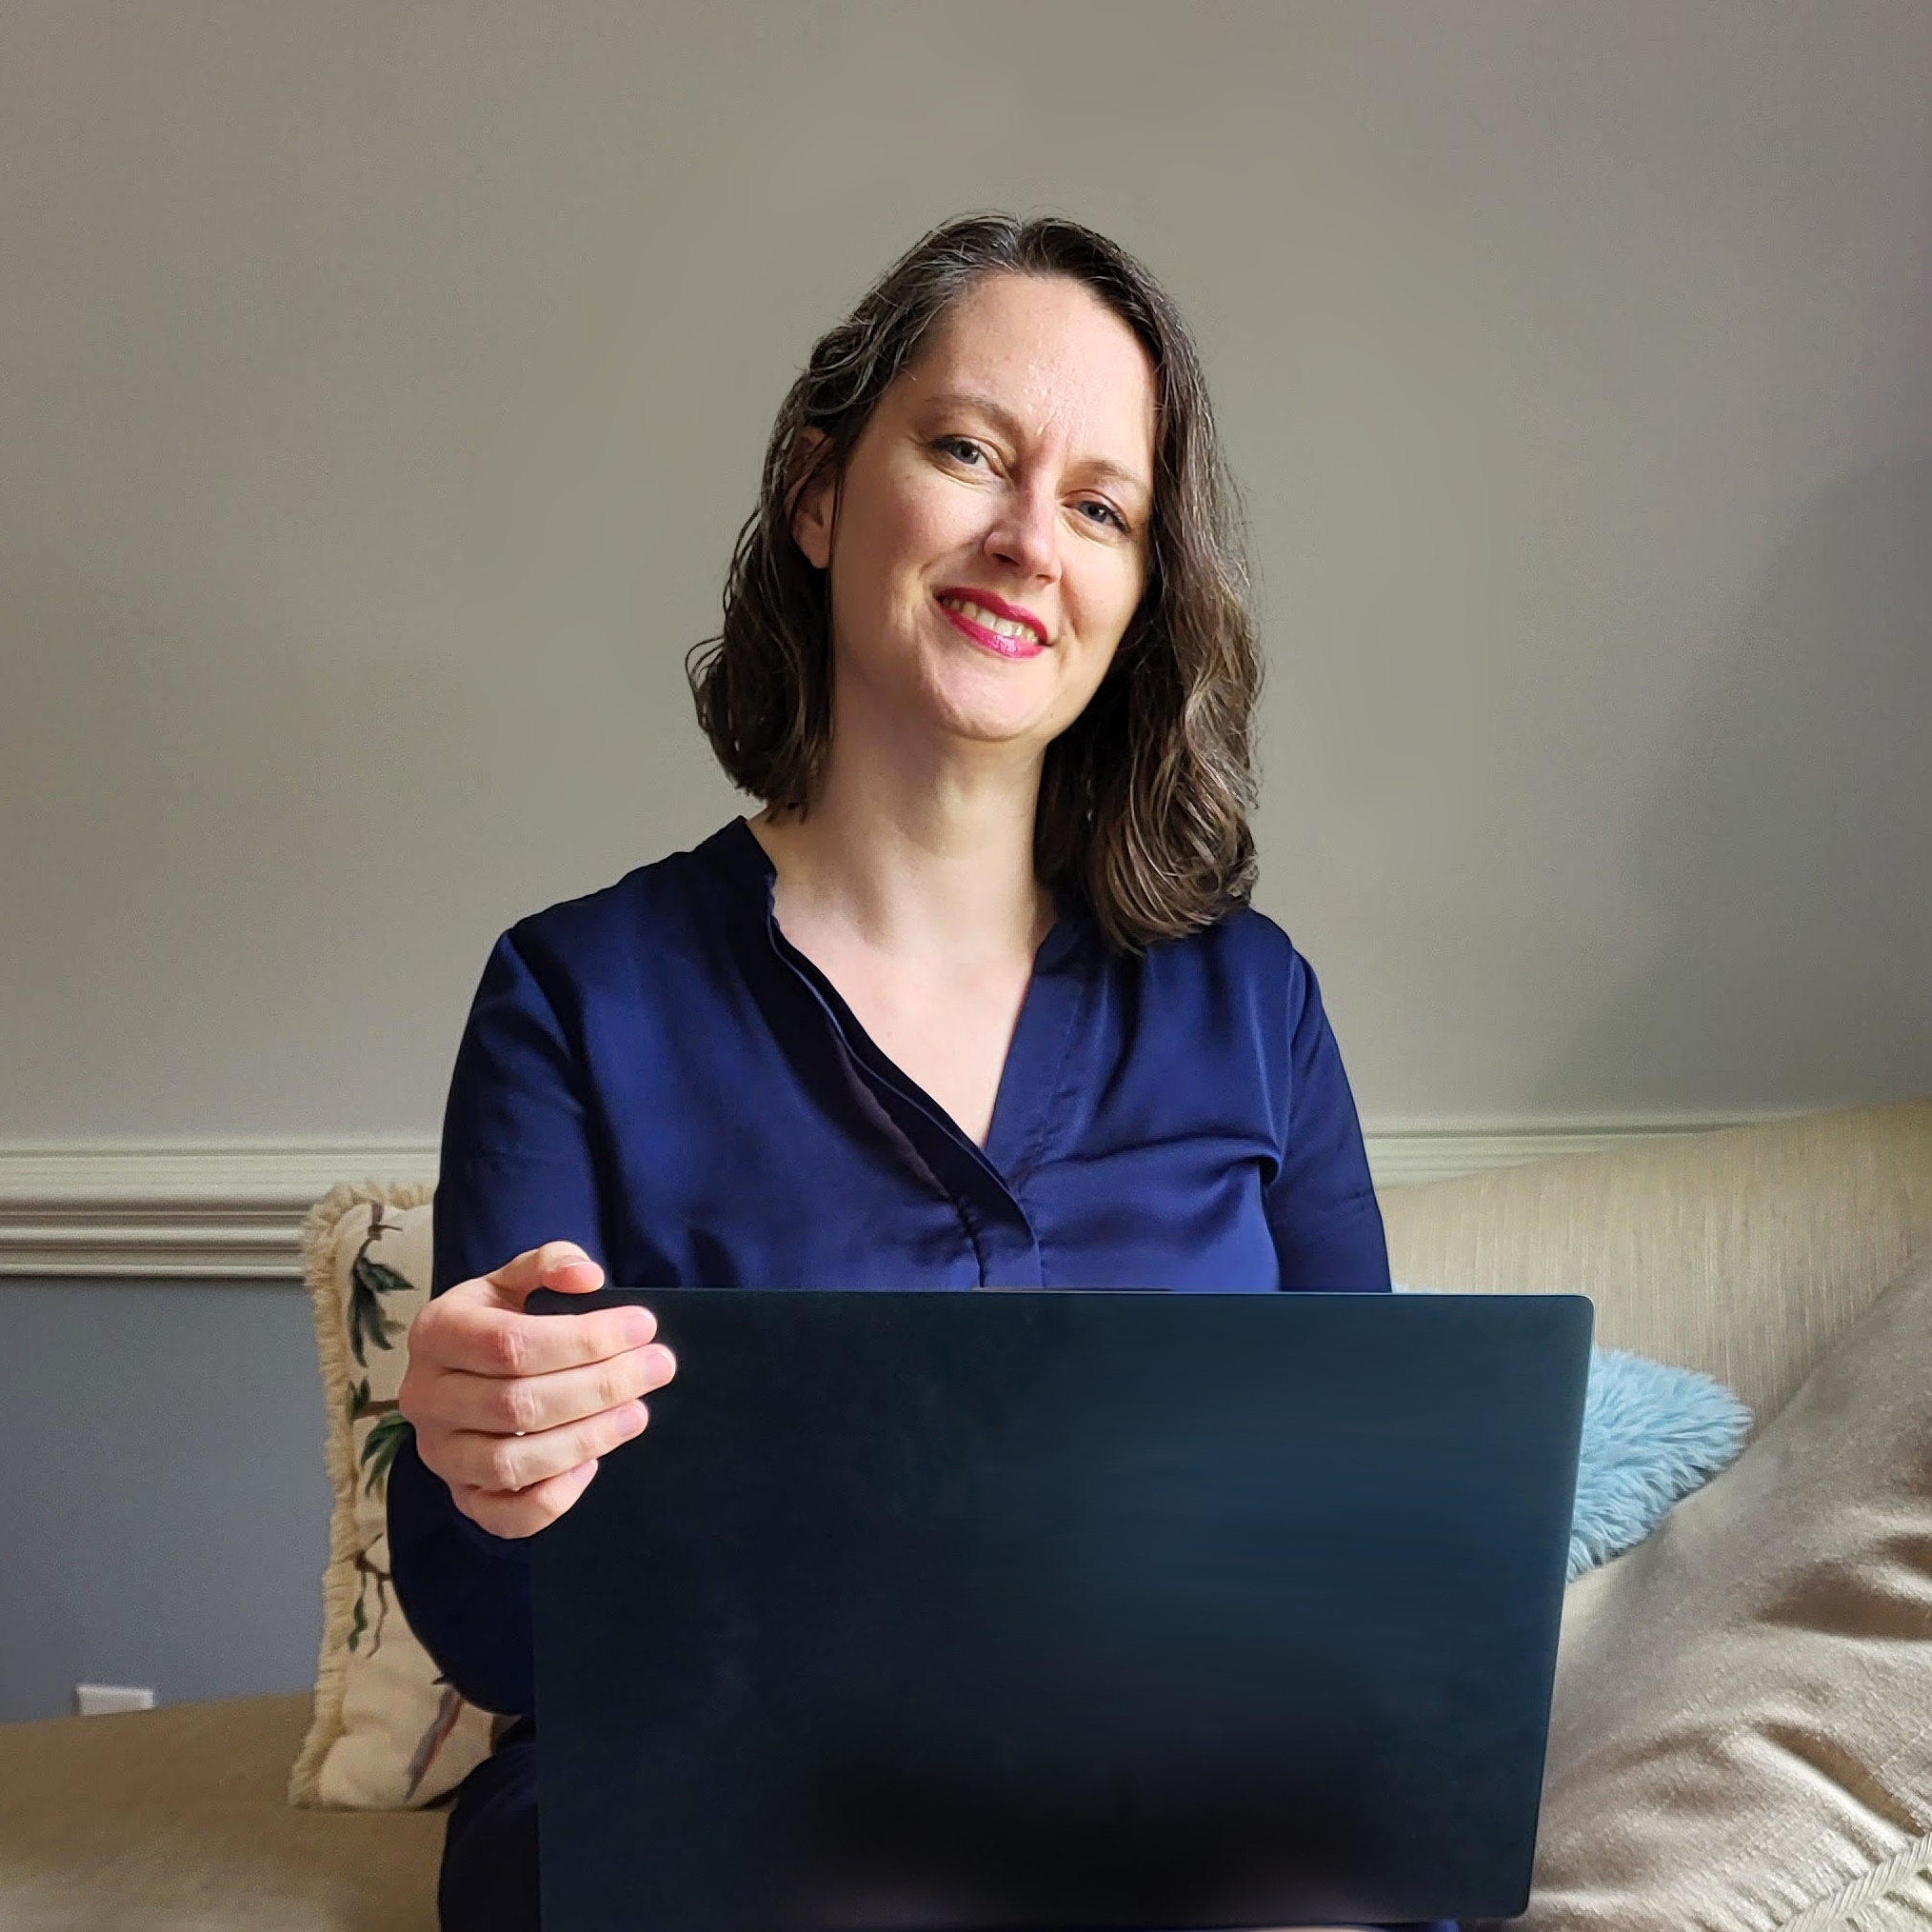 Jordan McCollum, a white woman in her forties with shoulder-length brown wavy hair, in a navy shirt, sitting on a couch holding a laptop